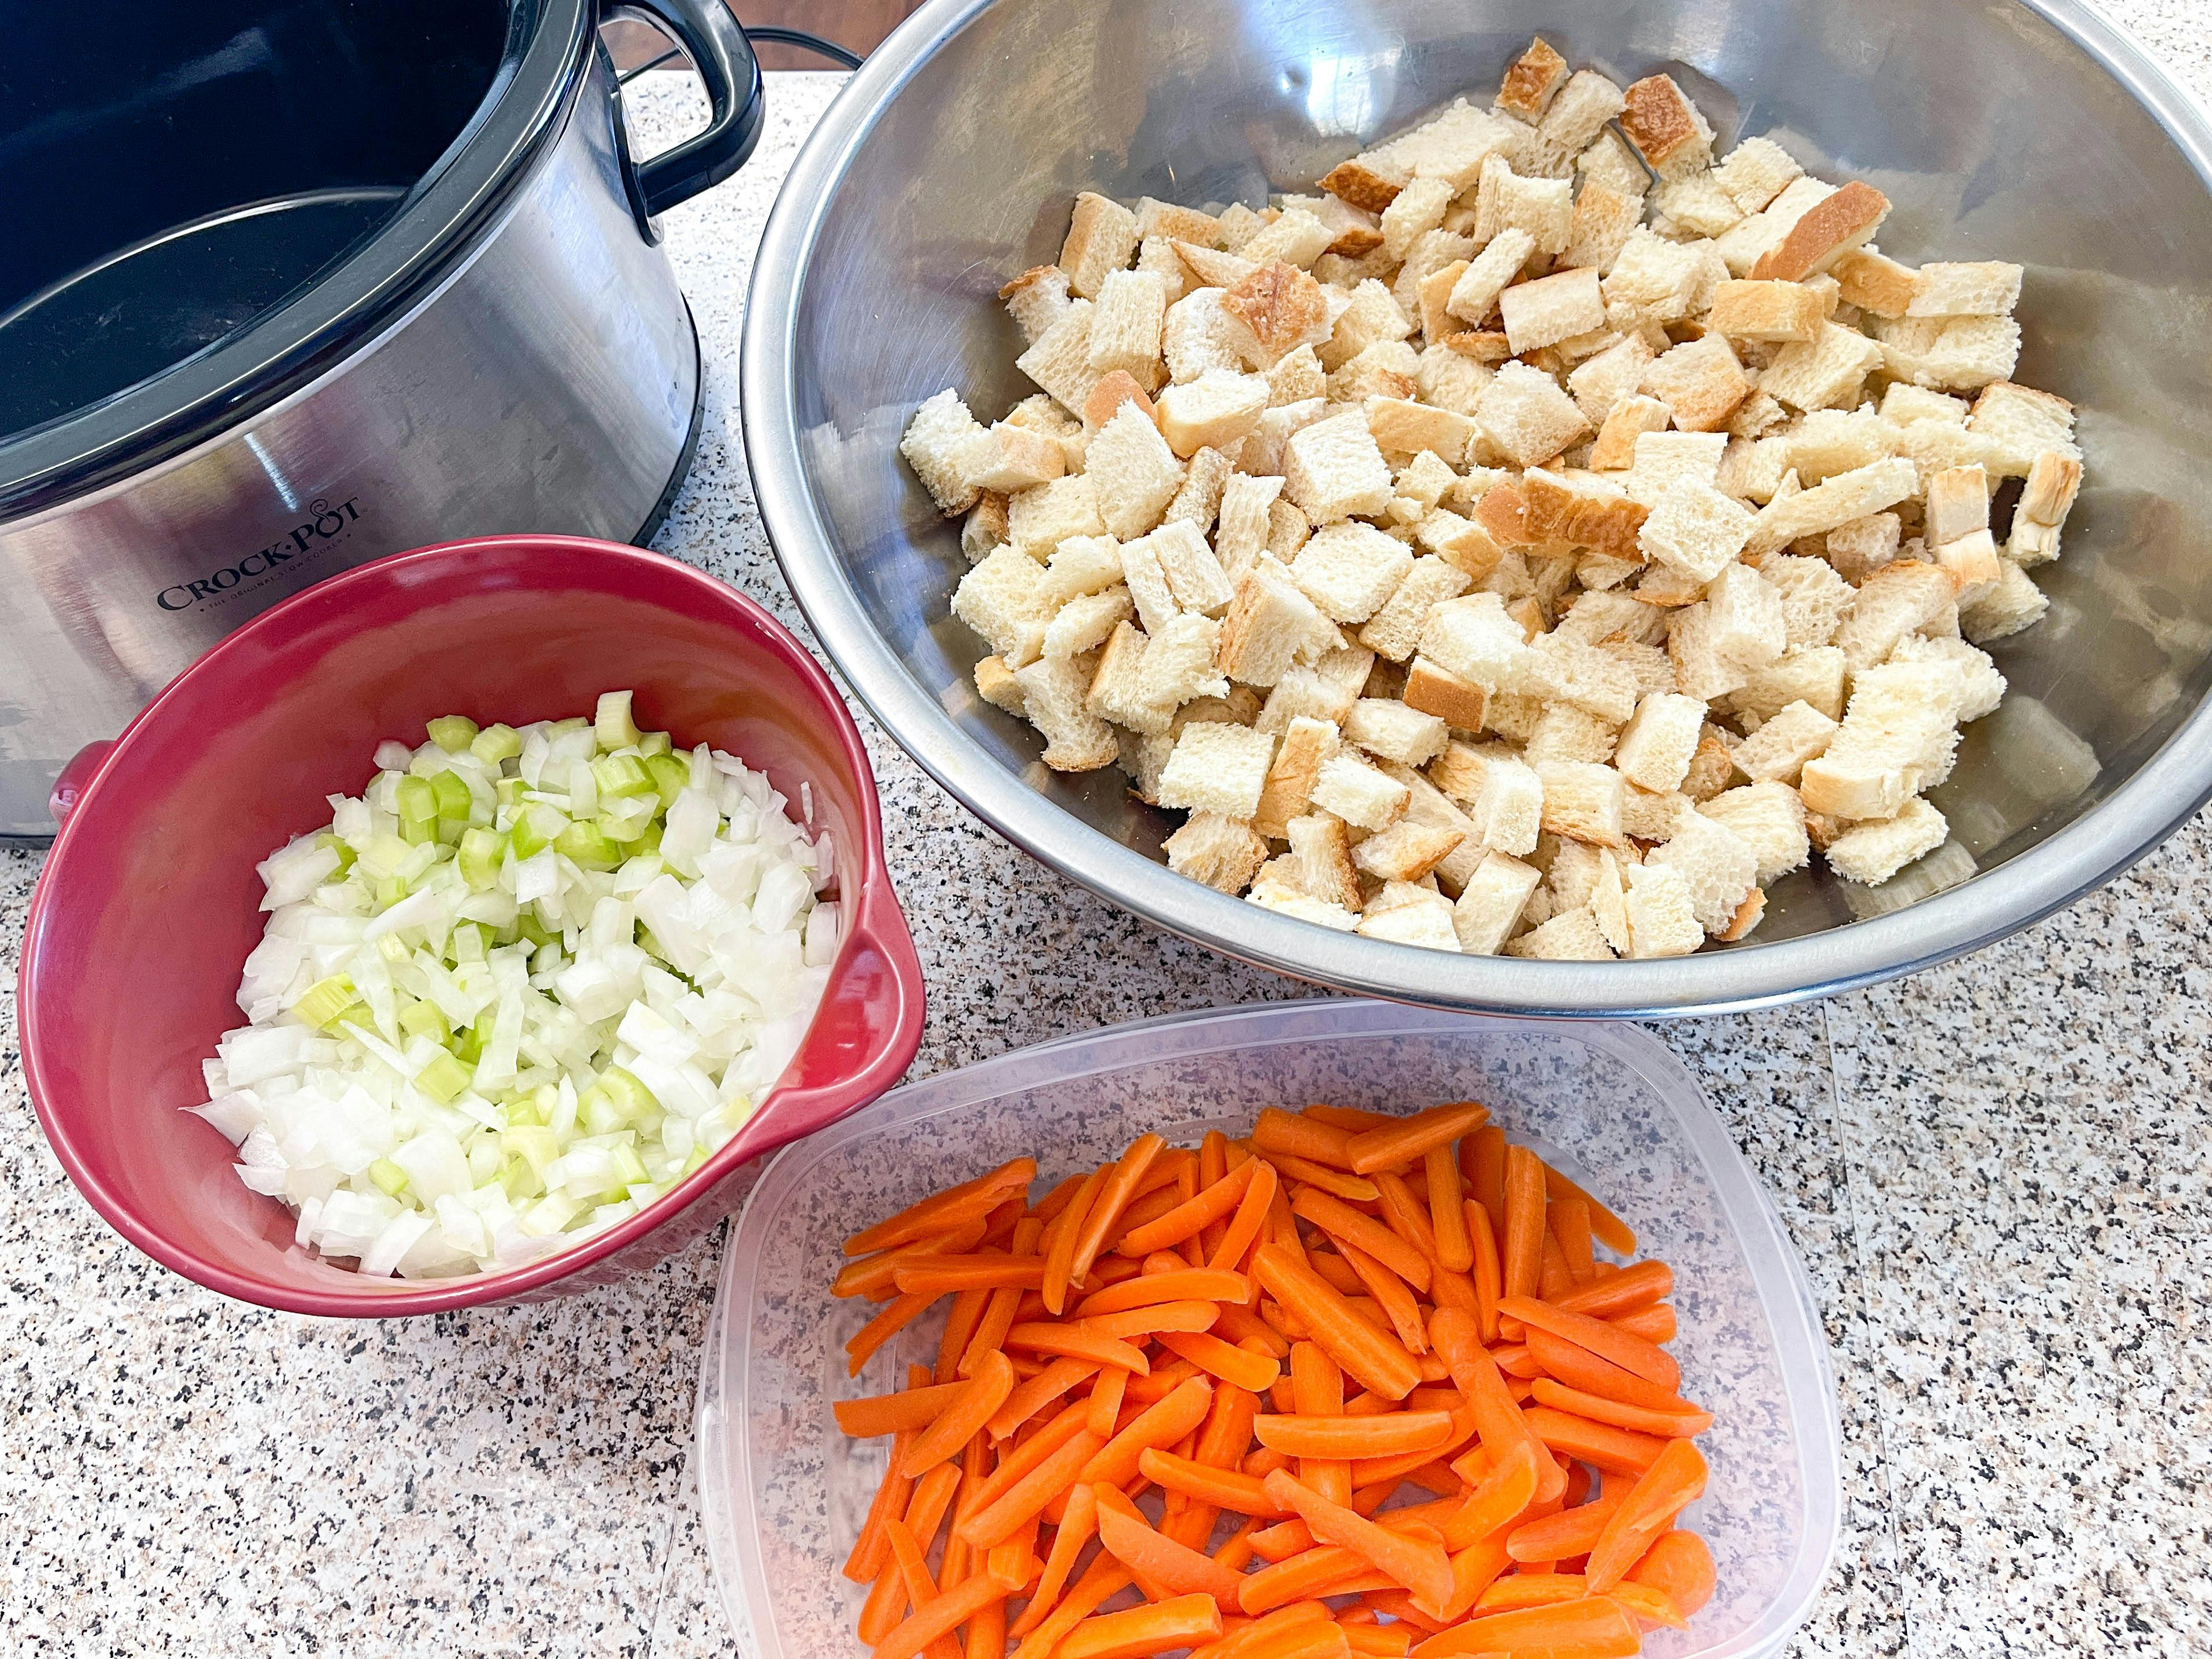 Ingredients for stuffing on the side of a slow cooker